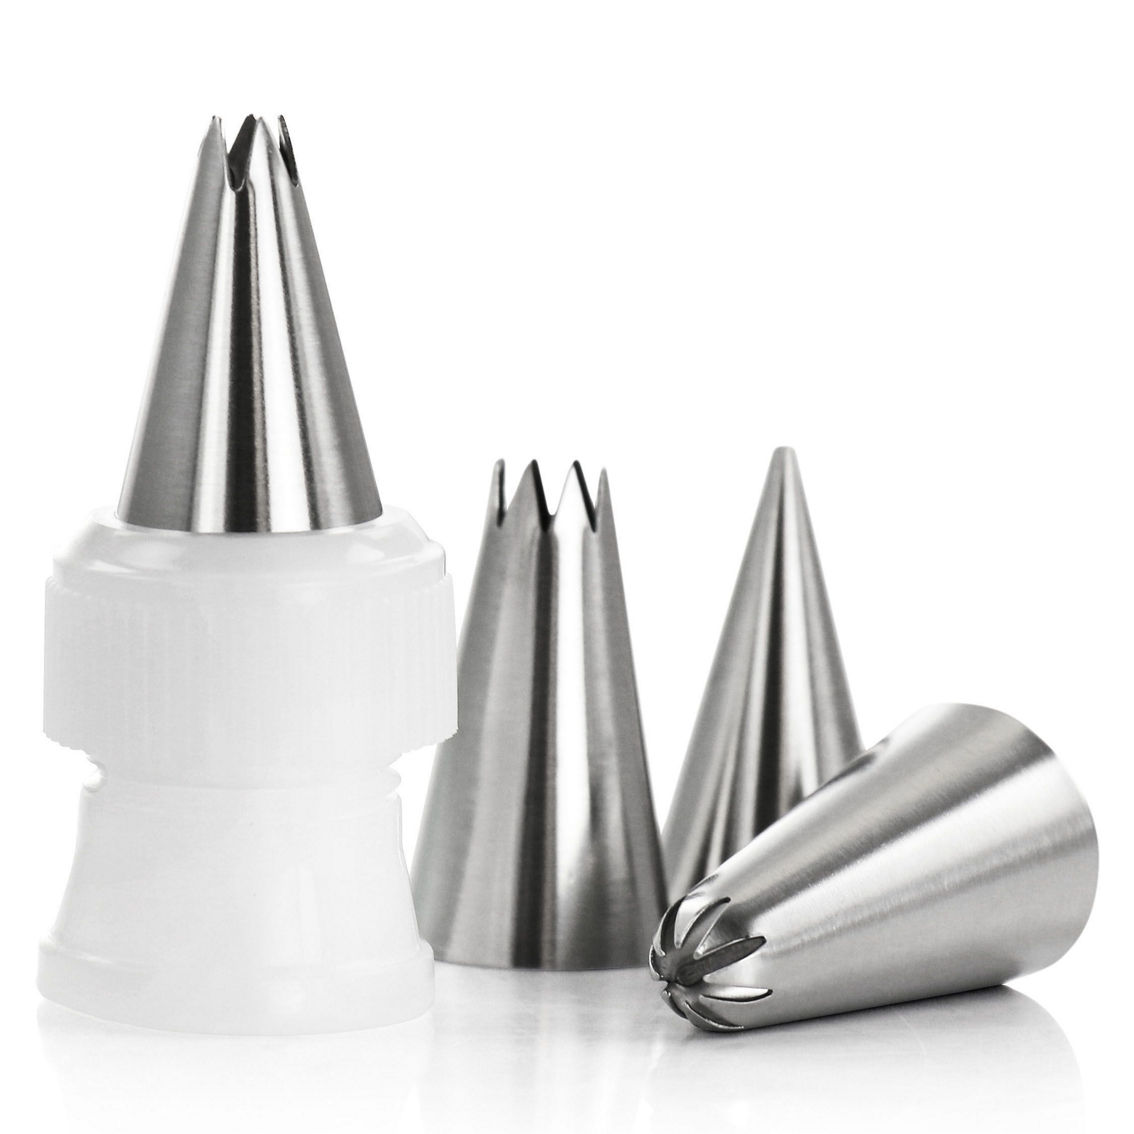 Martha Stewart 16 Piece Stainless Steel Assorted Cake Decorating Nozzles - Image 3 of 5